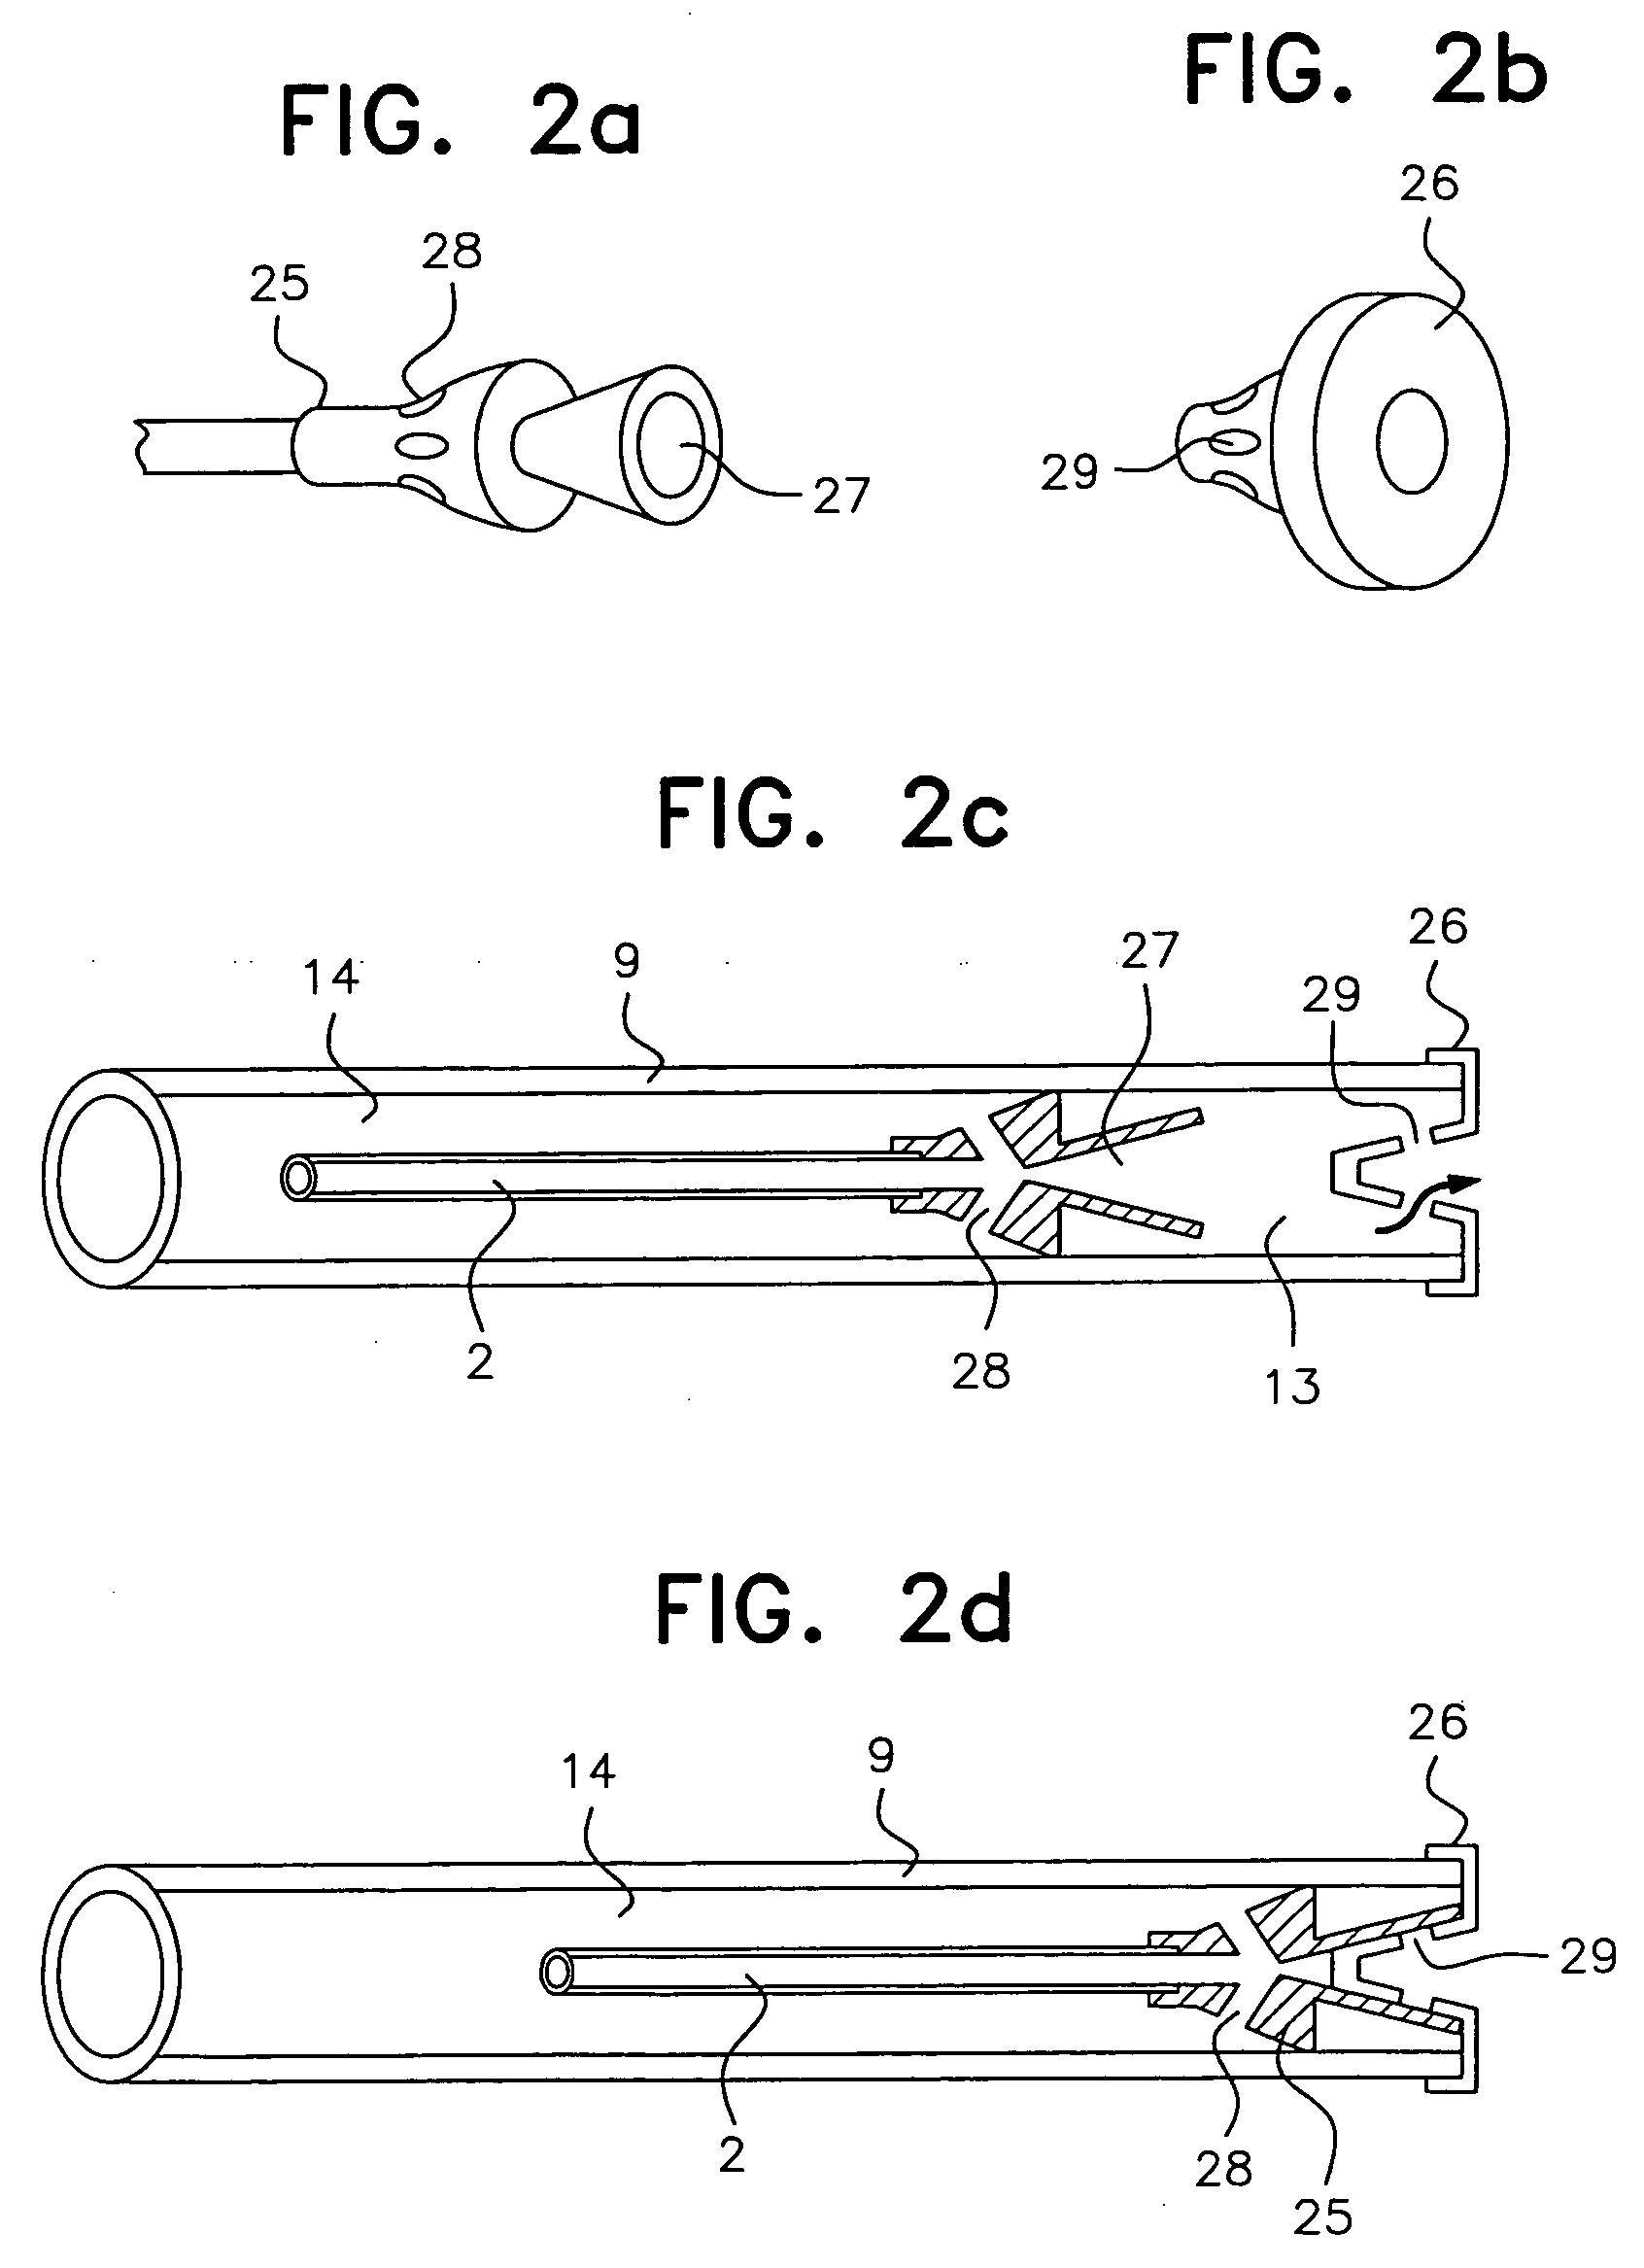 Urinary catheter assembly allowing for non-contaminated insertion of the catheter into a urinary canal